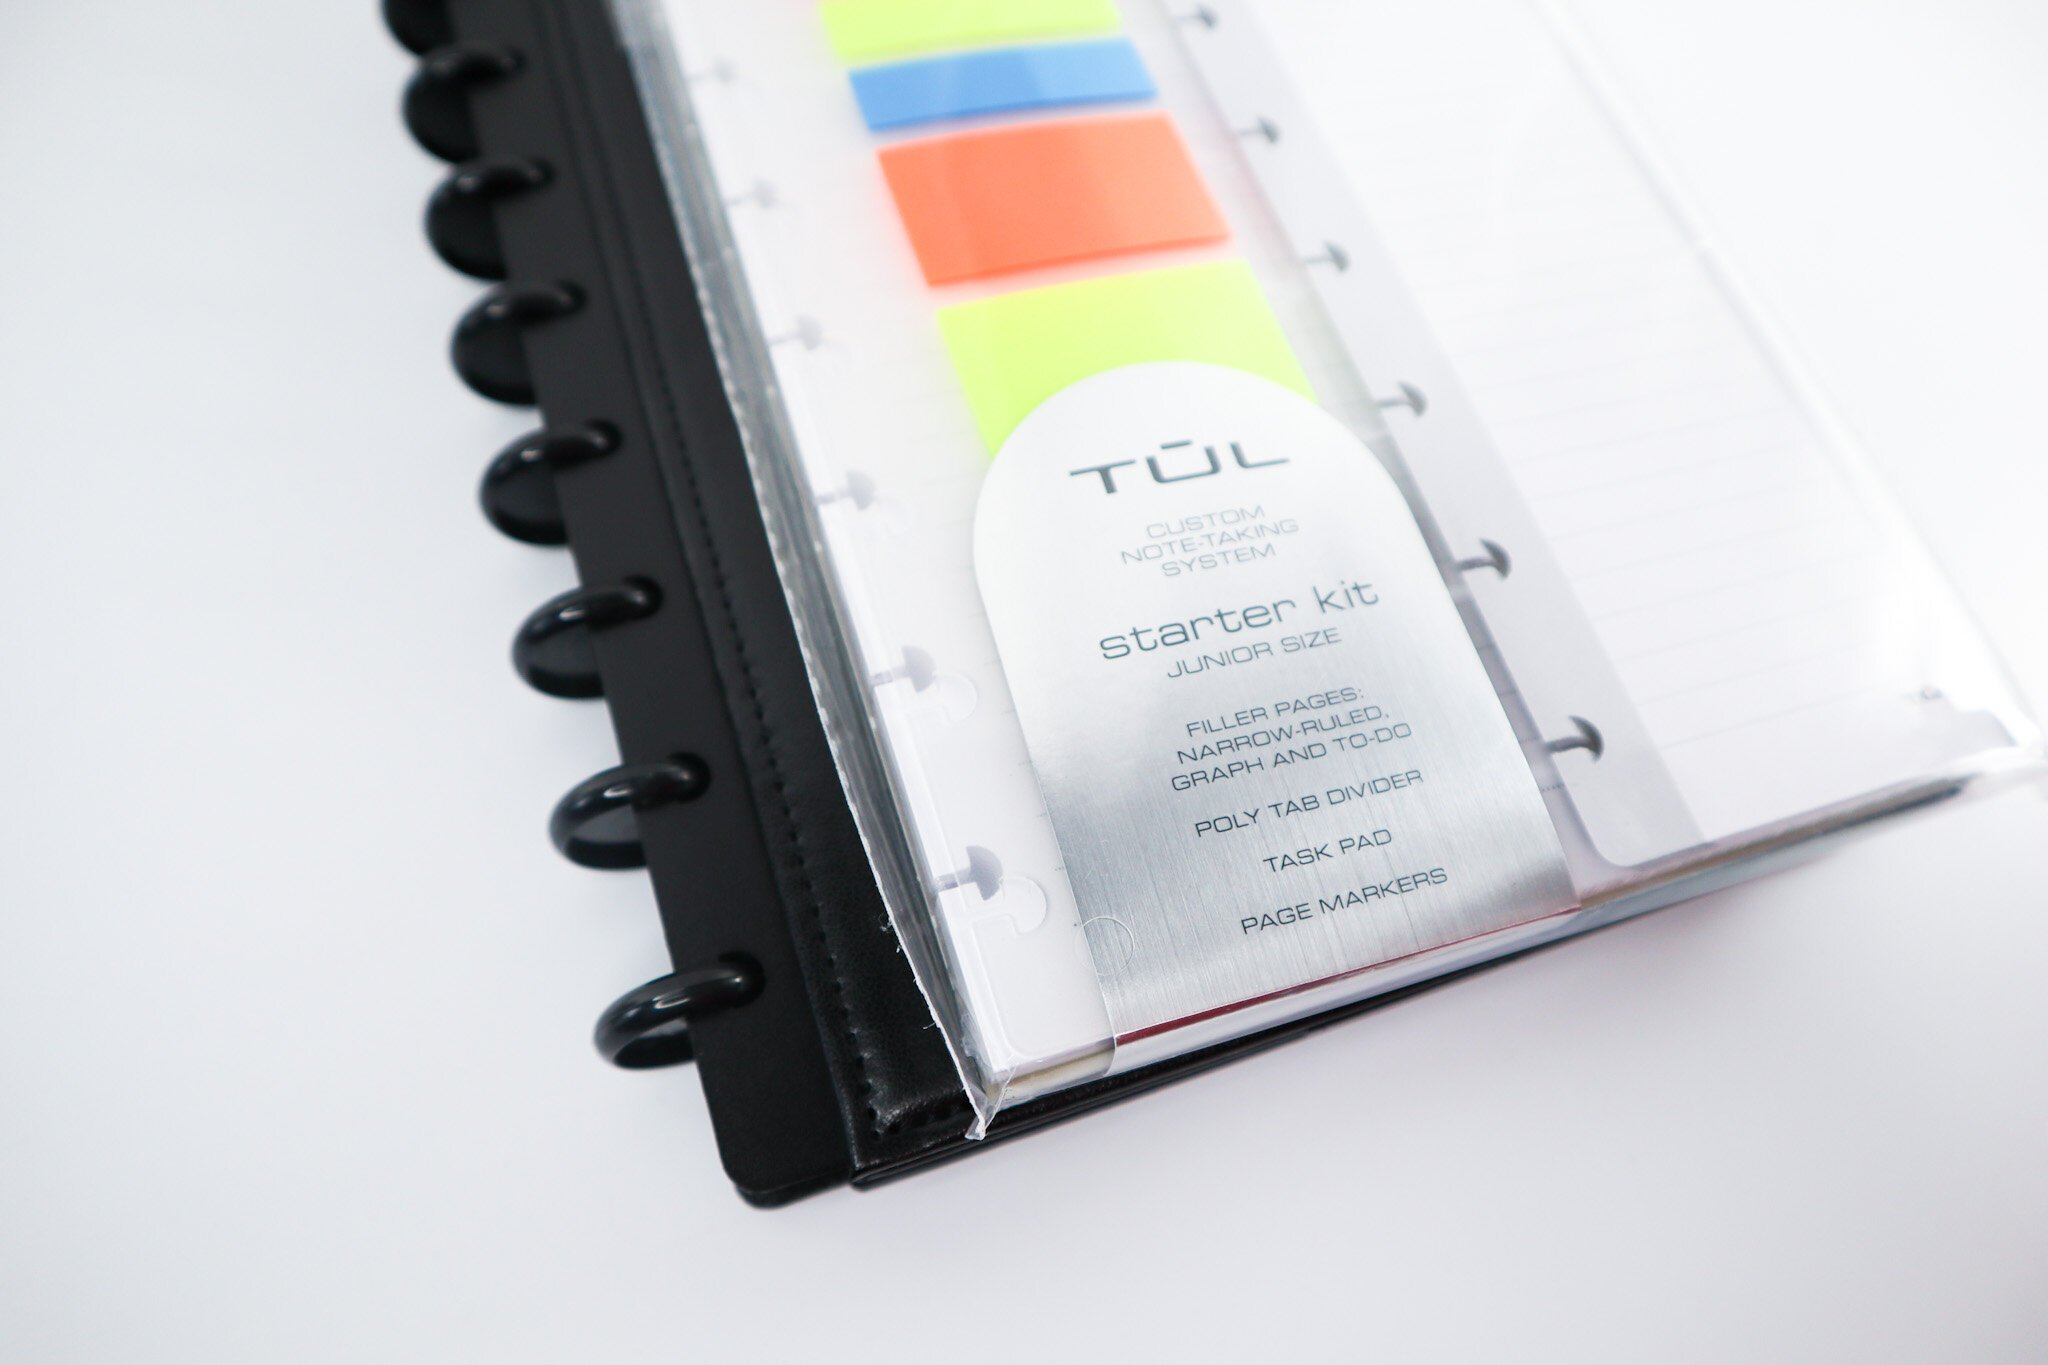  TUL Custom Note-Taking System Discbound Hole Punch